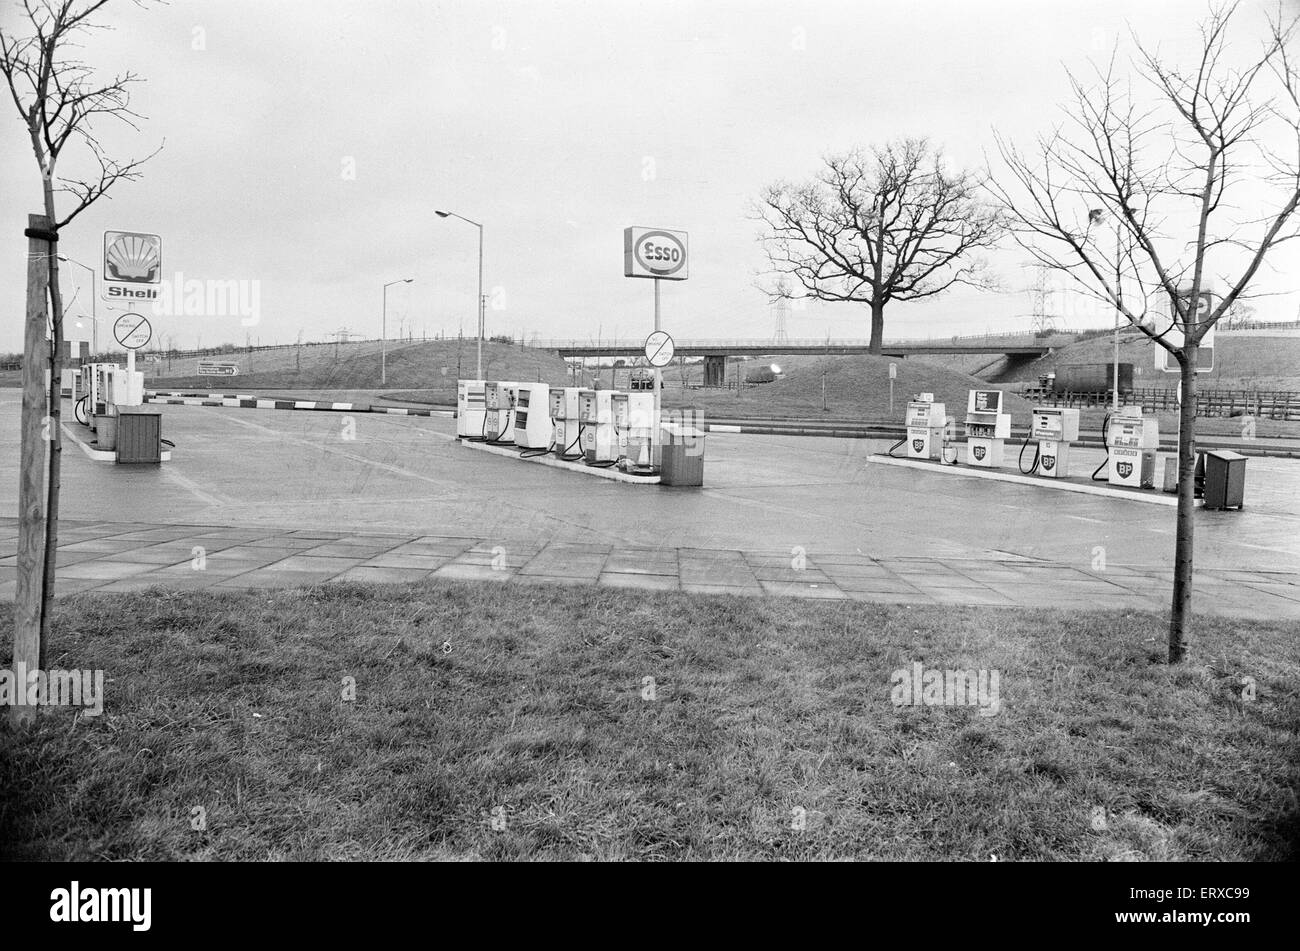 Fuel Shortages, Corley, Birmingham, Tuesday 4th December 1973. No Petrol. Forecourt Empty Stock Photo